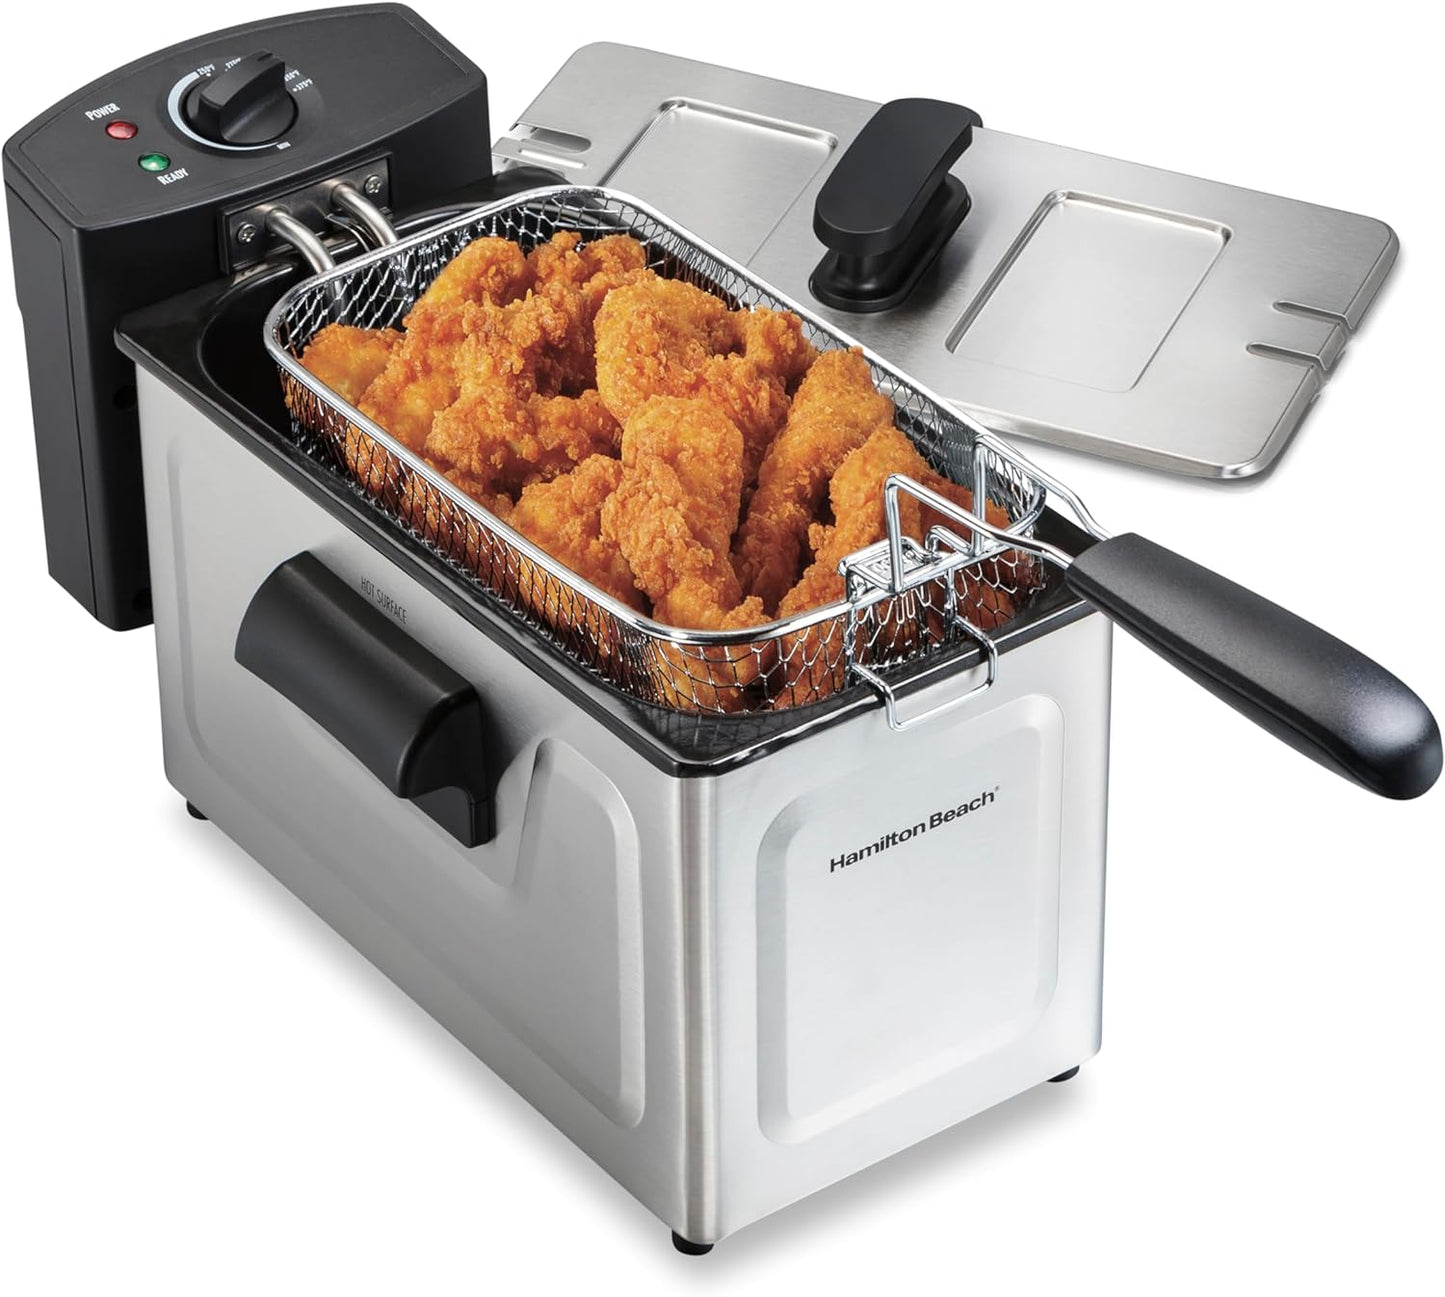 Hamilton Beach 35325 Professional Style Electric Deep Fryer, Frying Basket with Hooks, 1500 Watts, 3 Liters, Stainless Steel